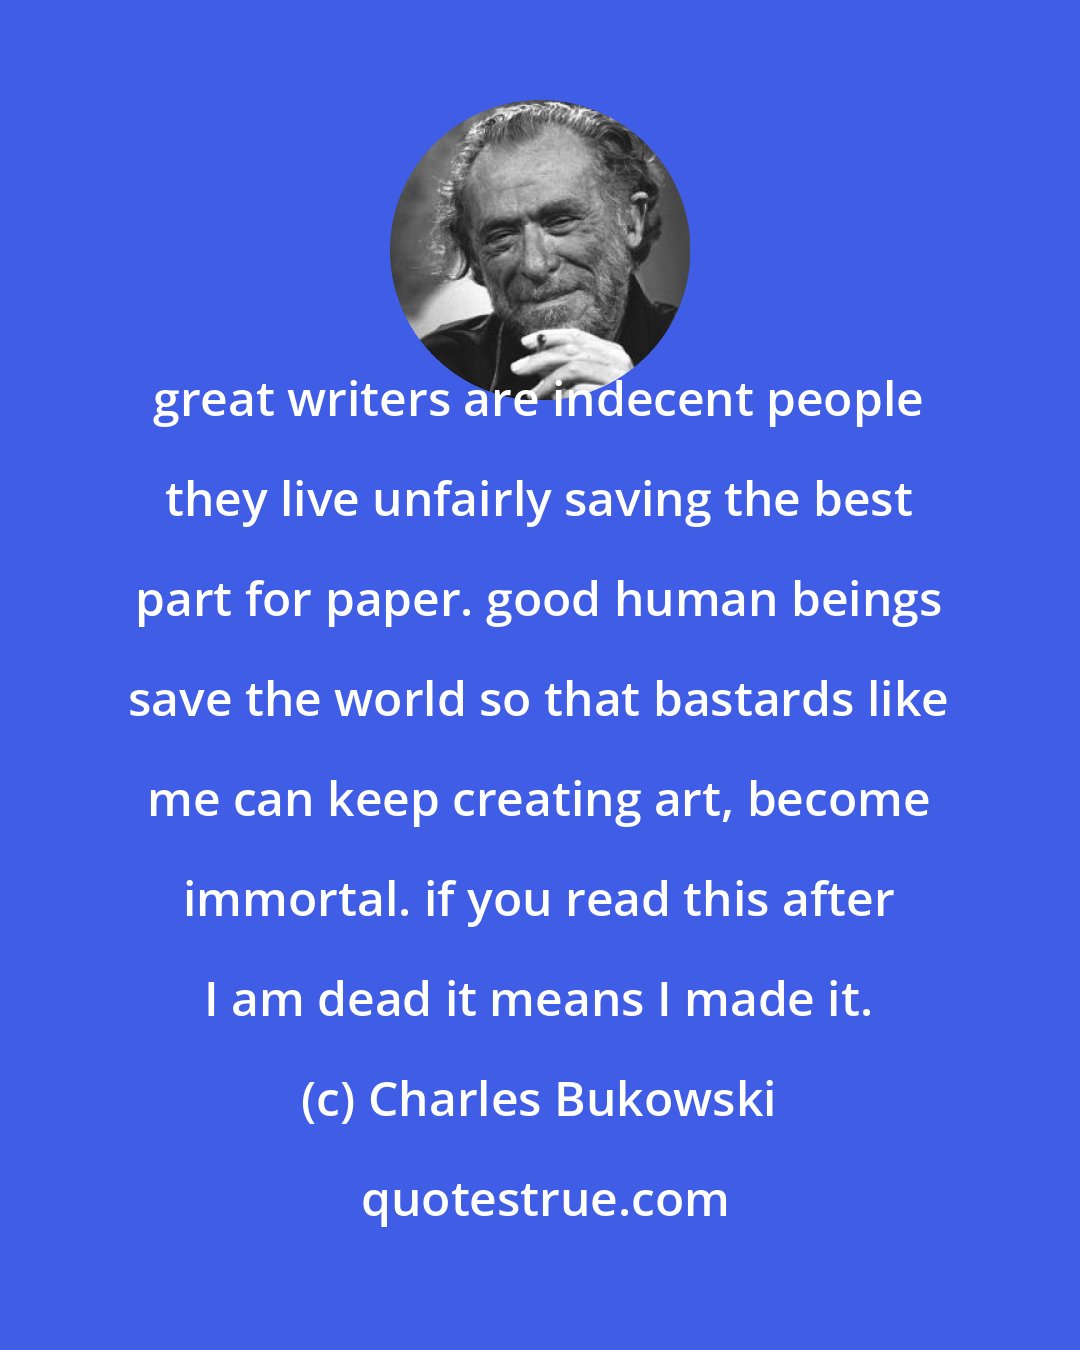 Charles Bukowski: great writers are indecent people they live unfairly saving the best part for paper. good human beings save the world so that bastards like me can keep creating art, become immortal. if you read this after I am dead it means I made it.